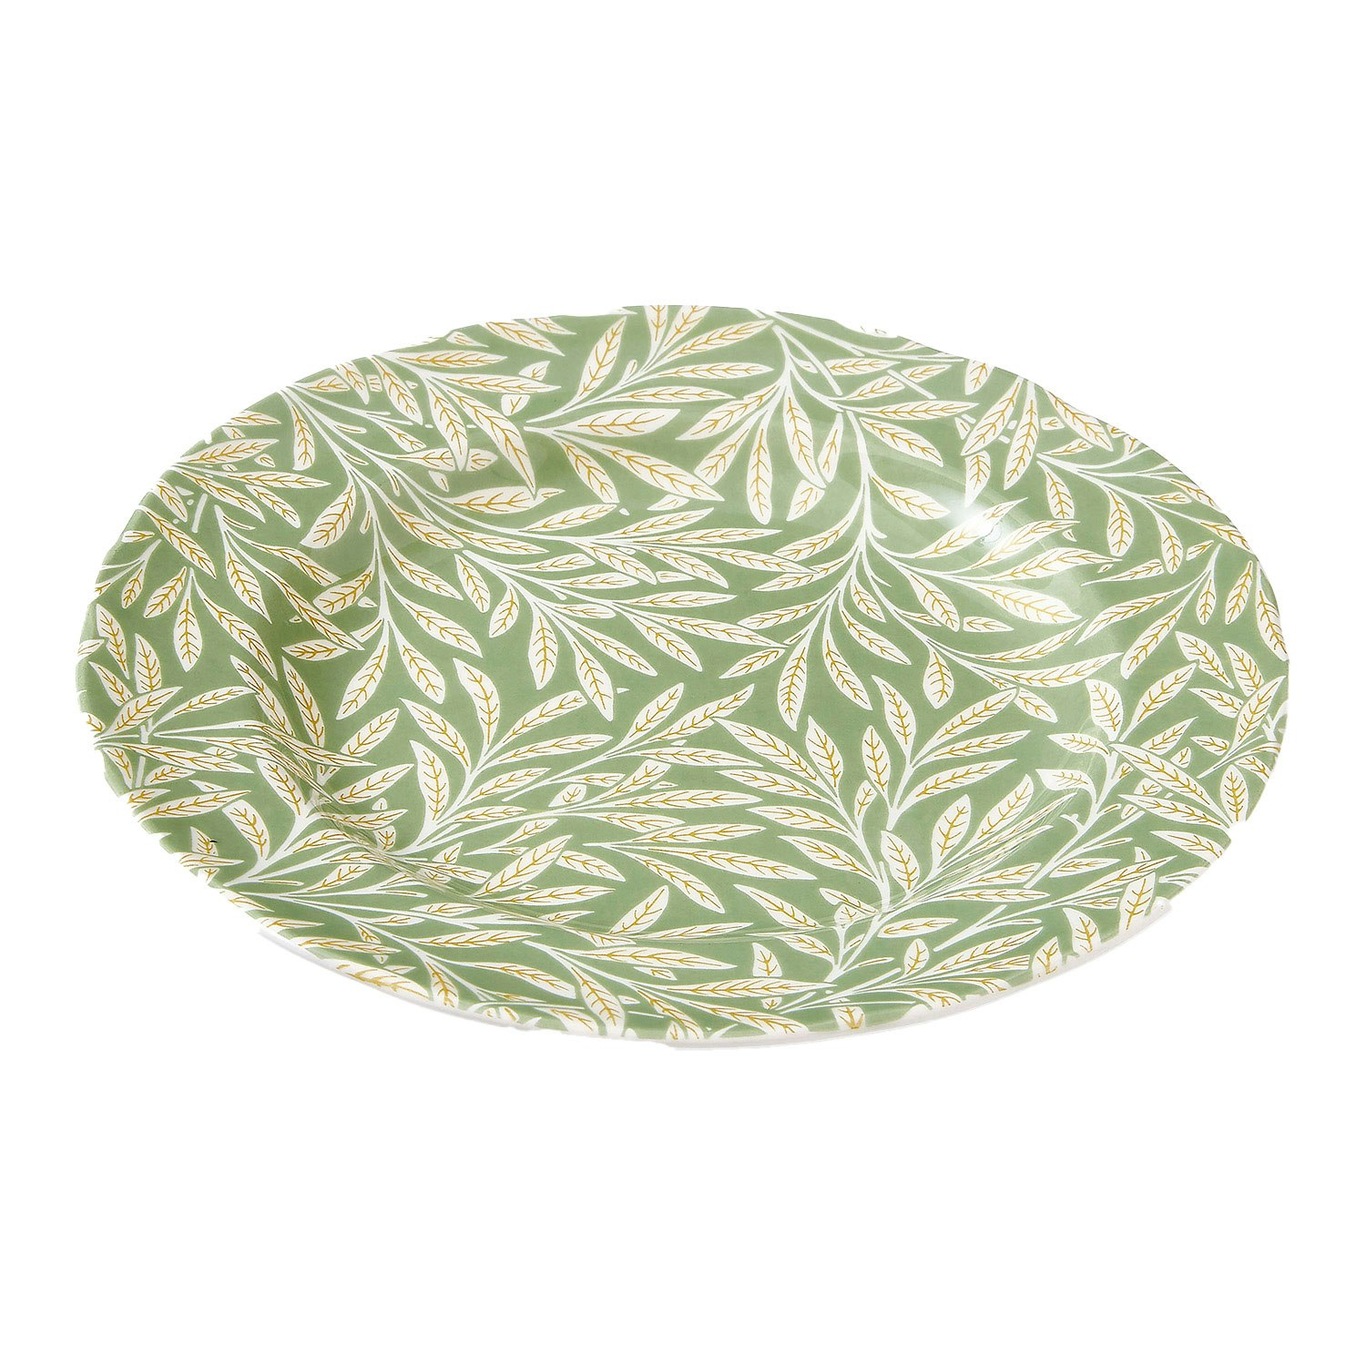 Morris & Co Side Plate 23 cm, Willow